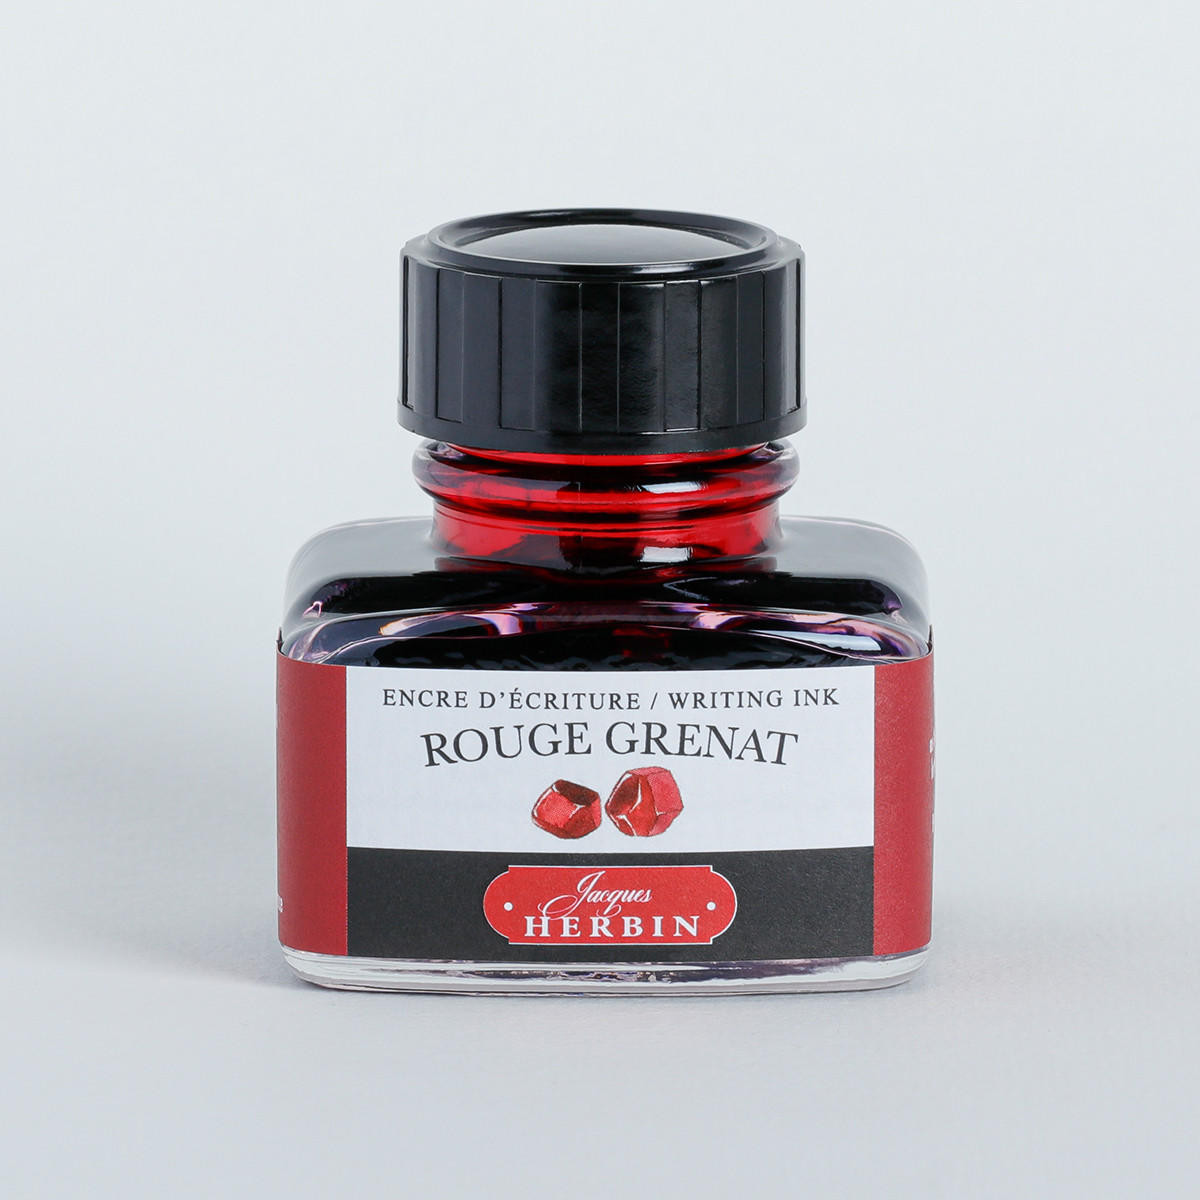 Herbin ’D’ Writing and Drawing Ink 30ml Rouge Grenat